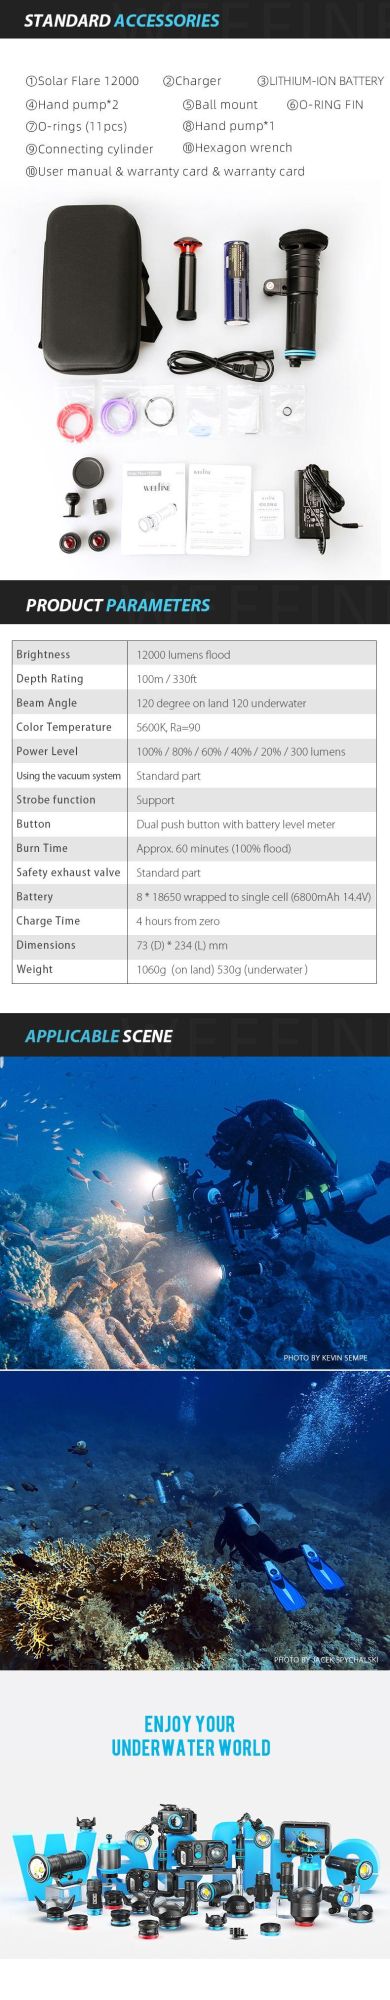 Top Rated High Brightness Lumens Professional Dive Lights for Scuba Diving